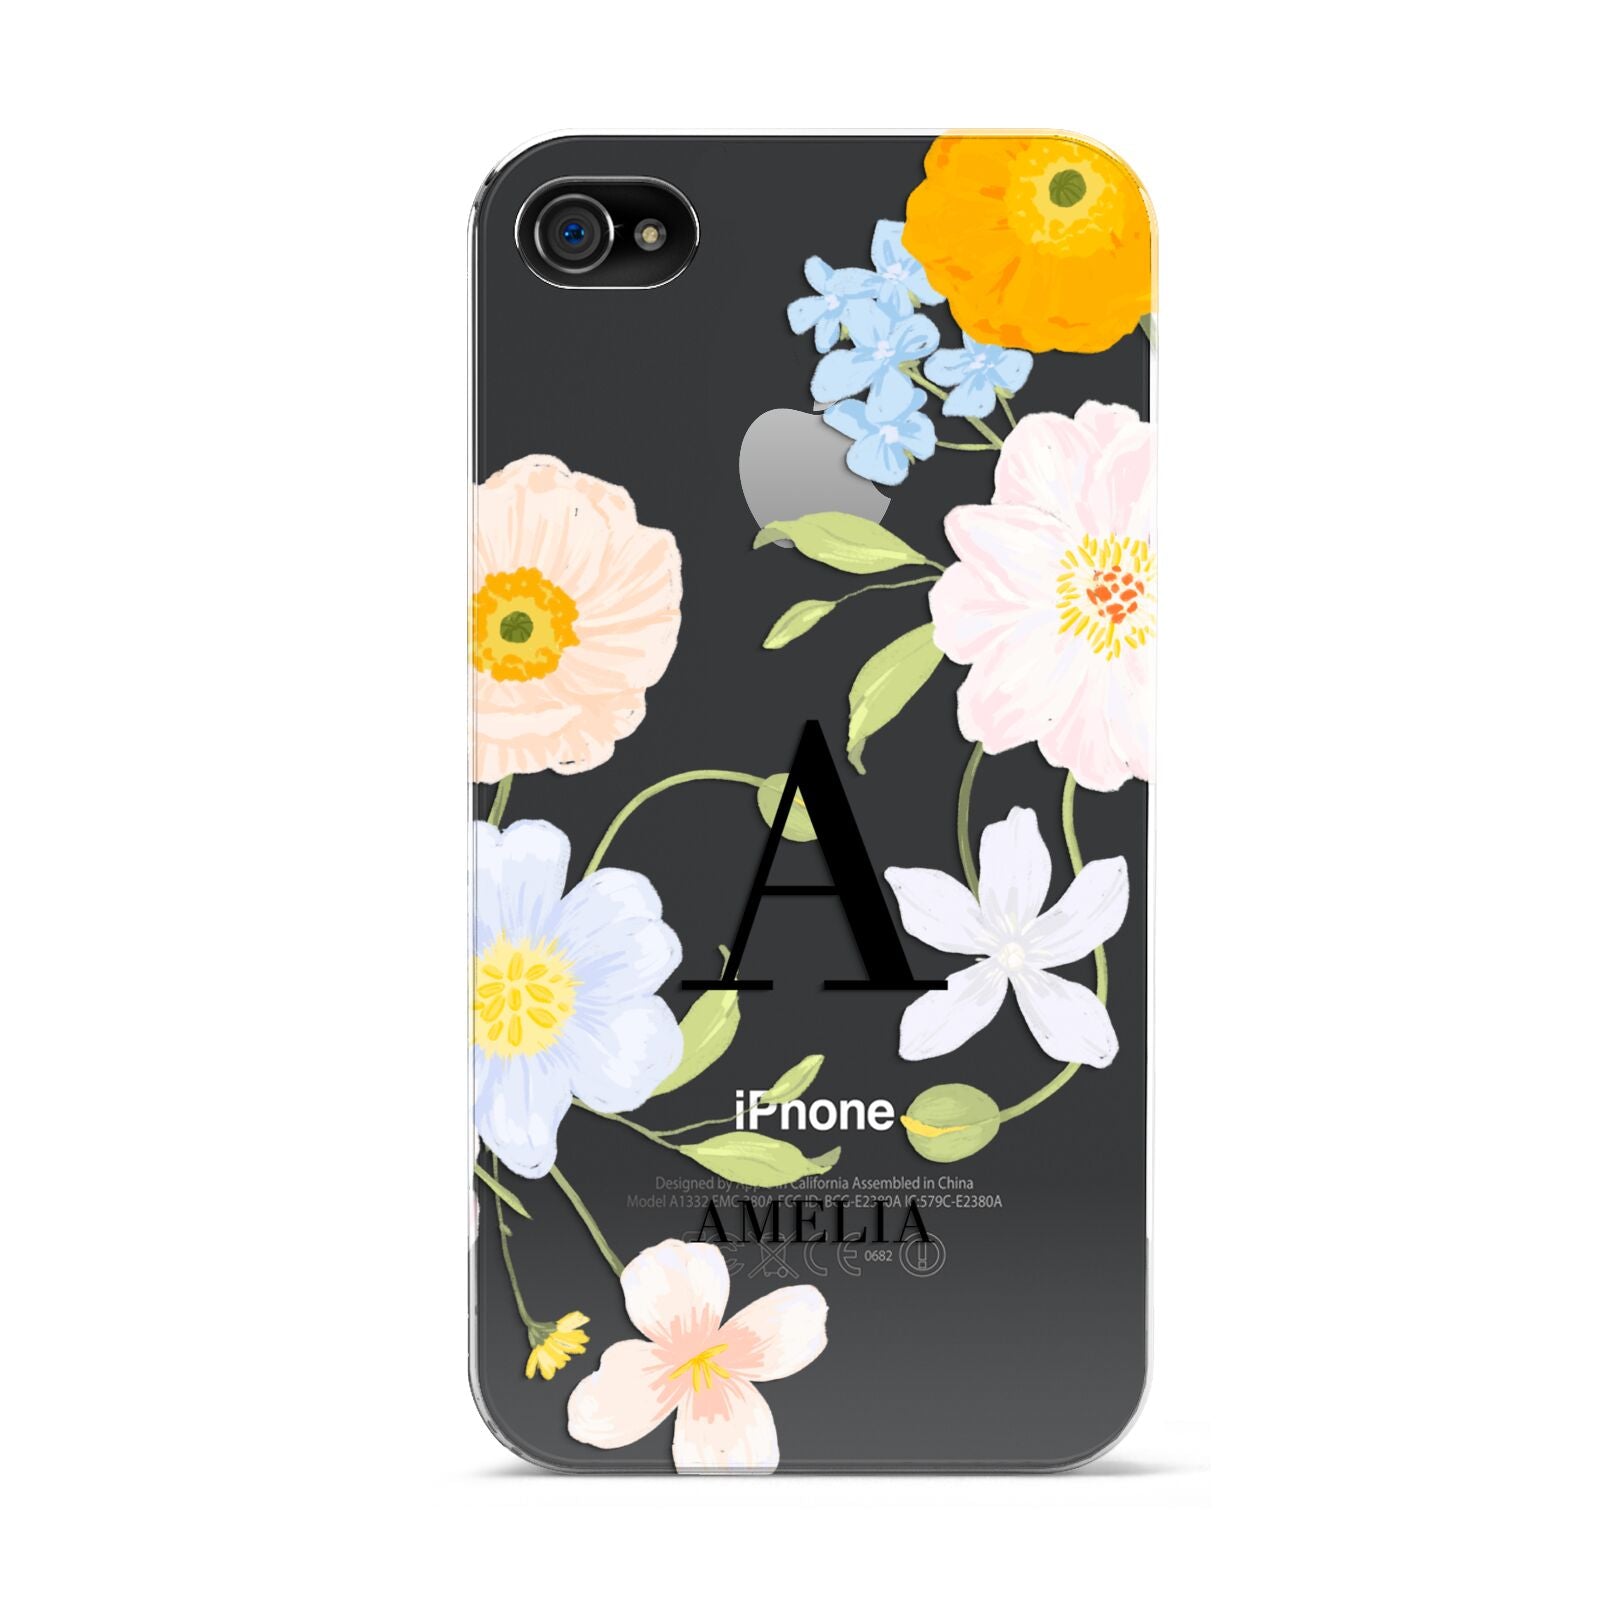 Customised Floral Apple iPhone 4s Case